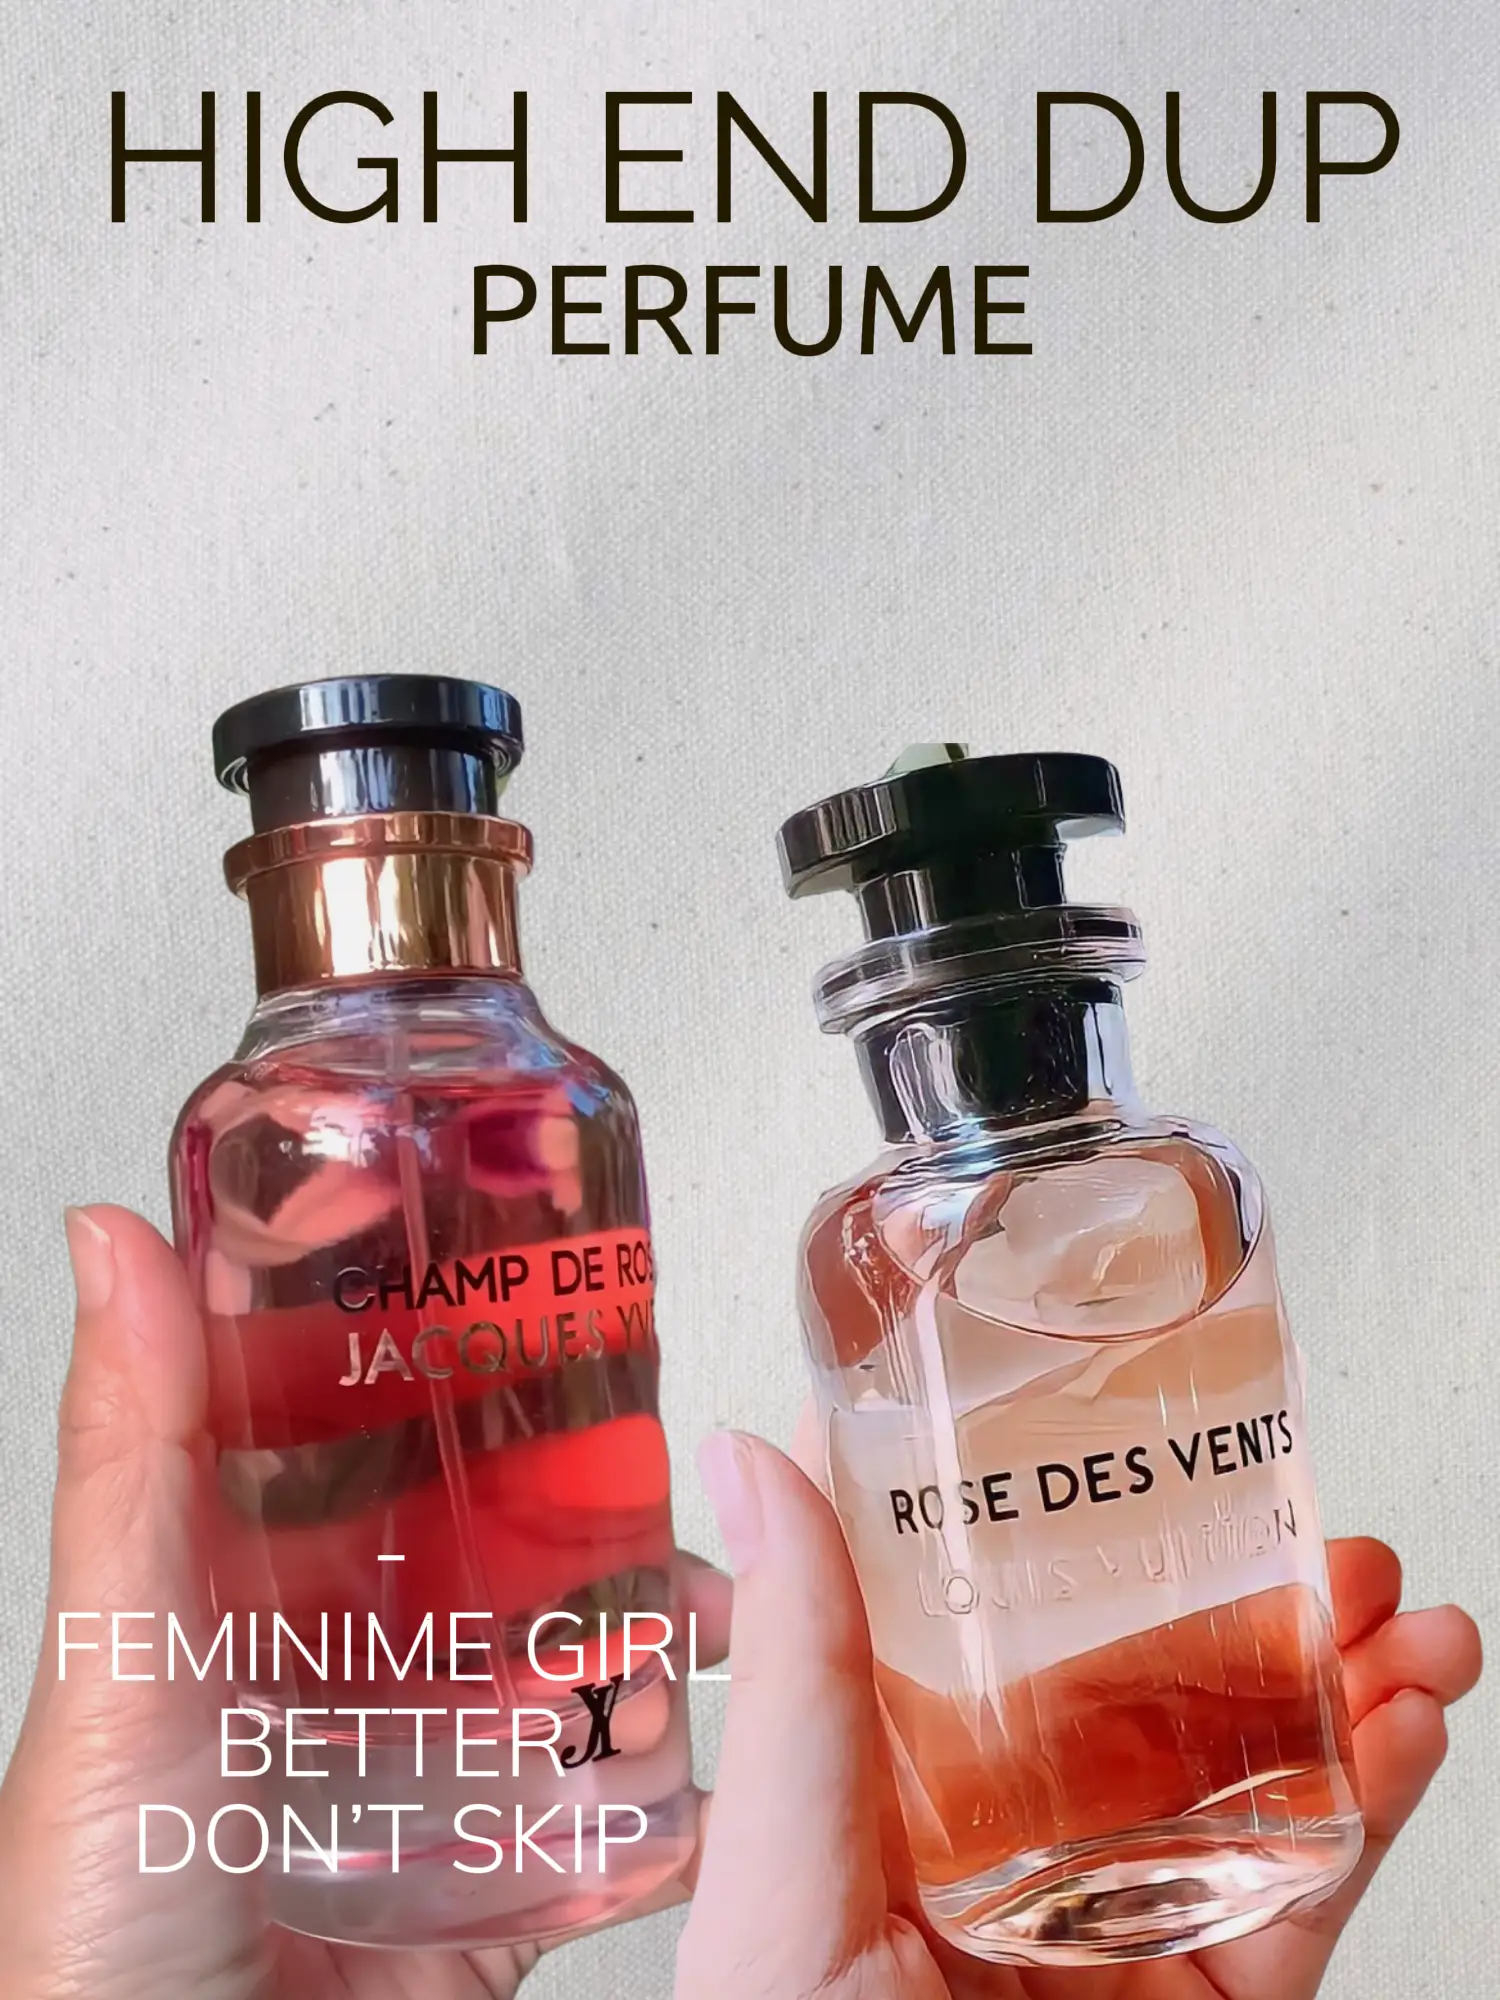 LV Battle Parfume! ❤️‍🔥, Gallery posted by Michelle Aruan